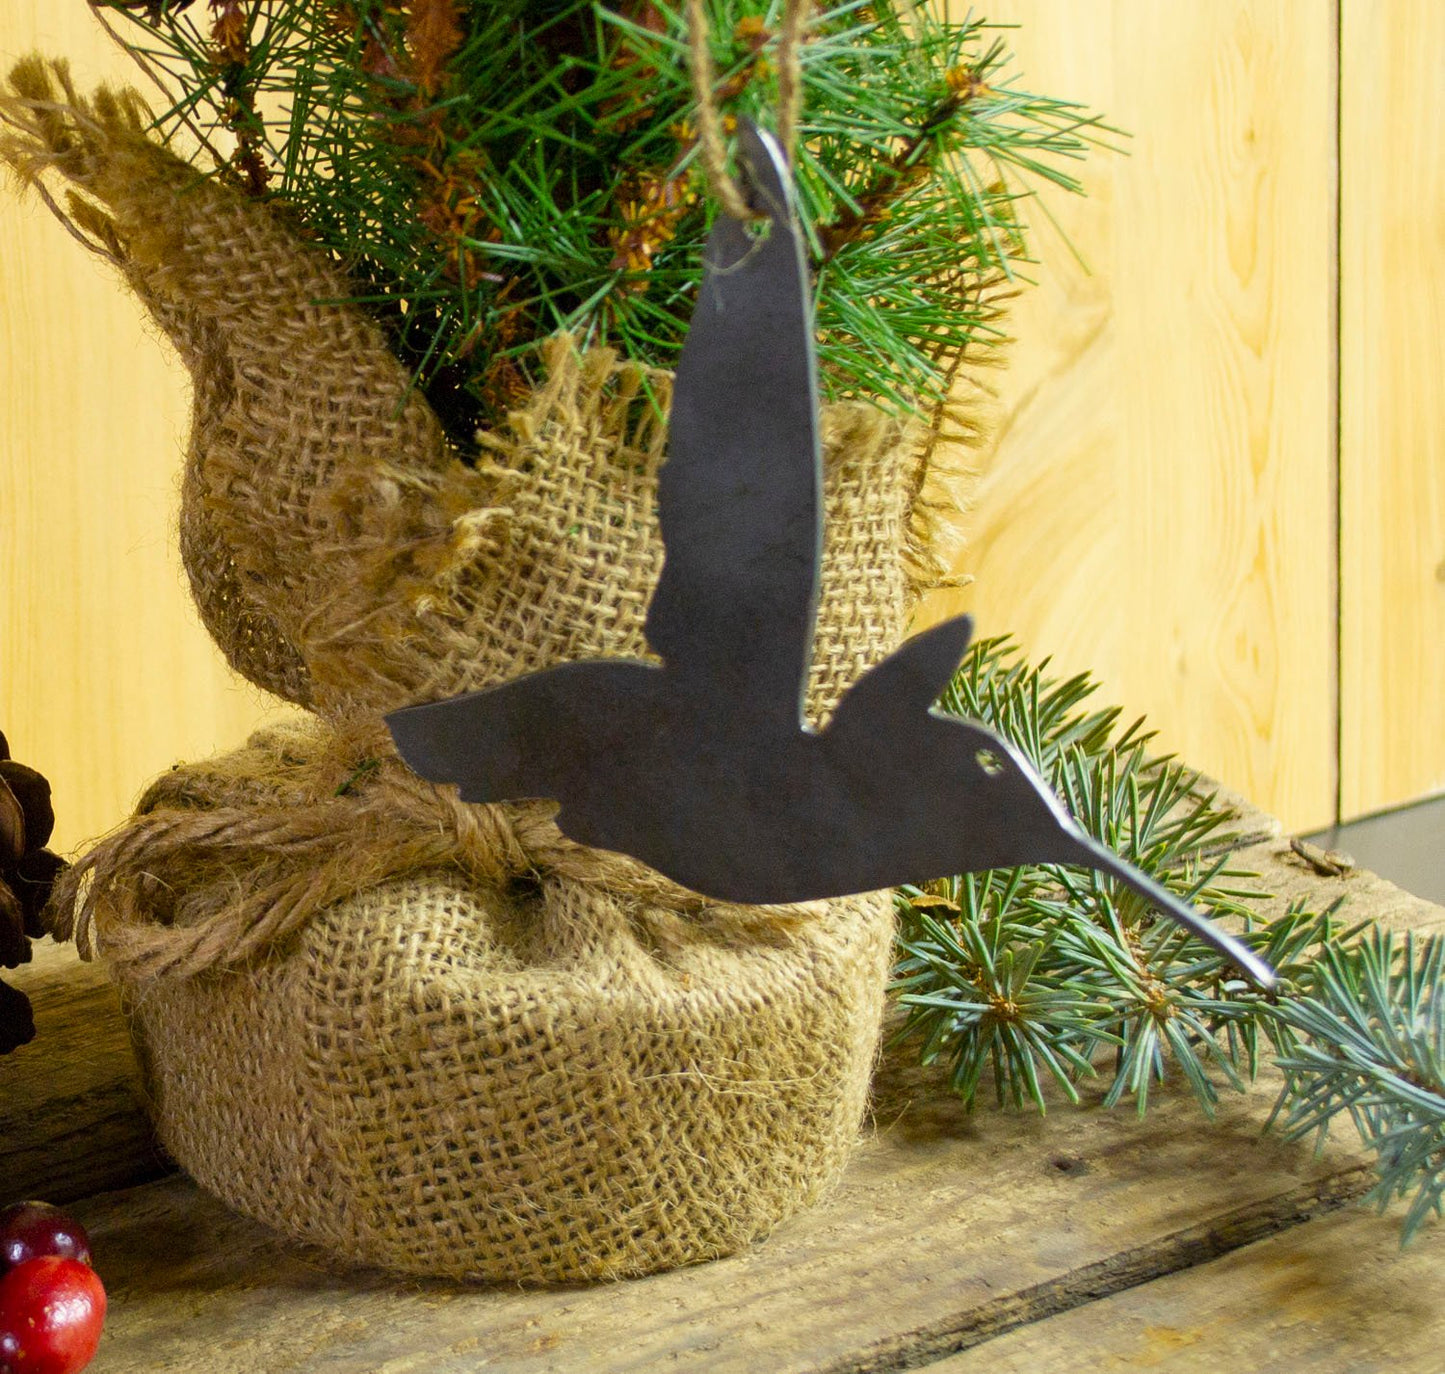 Hummingbird Metal Christmas Ornament Tree Stocking Stuffer Party Favor Holiday Decoration Raw Steel Gift Recycled Nature Home Decor